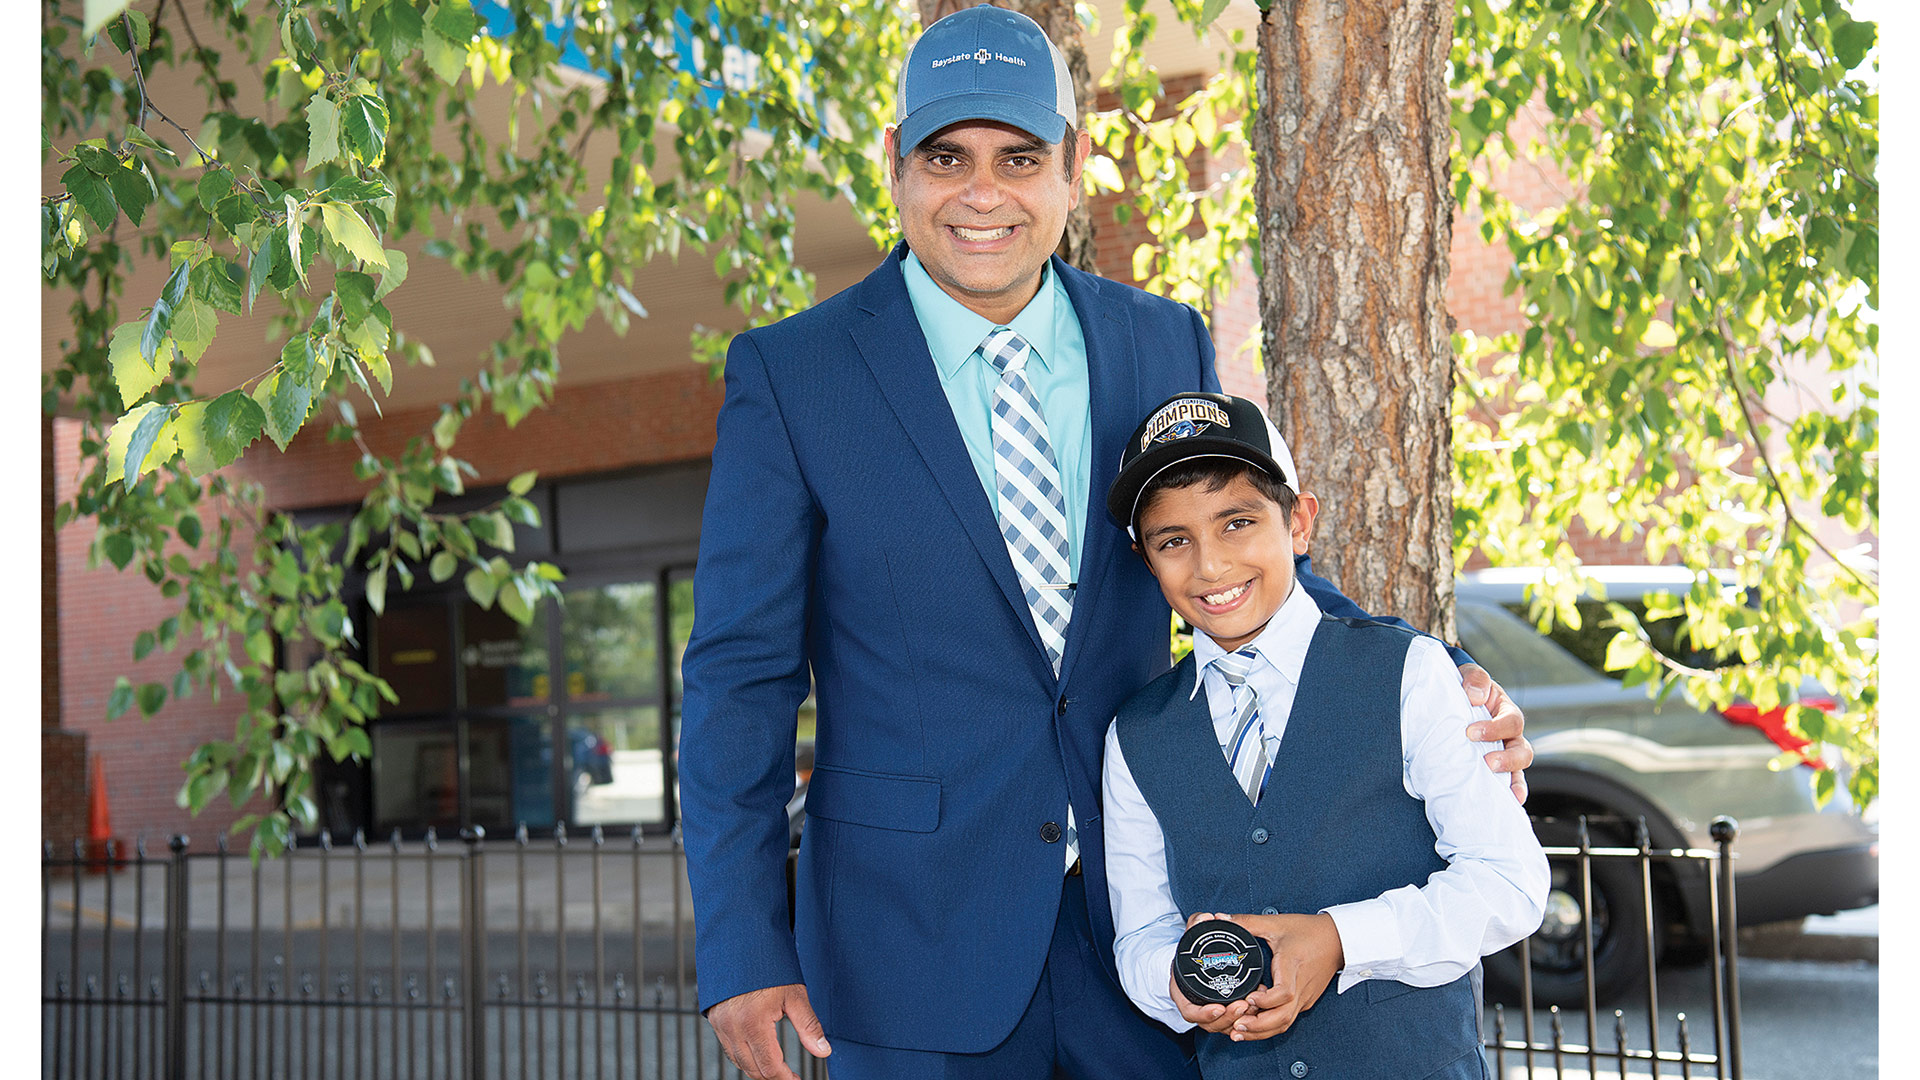 Dr. Sundeep Shukla, seen here with his son, Deven